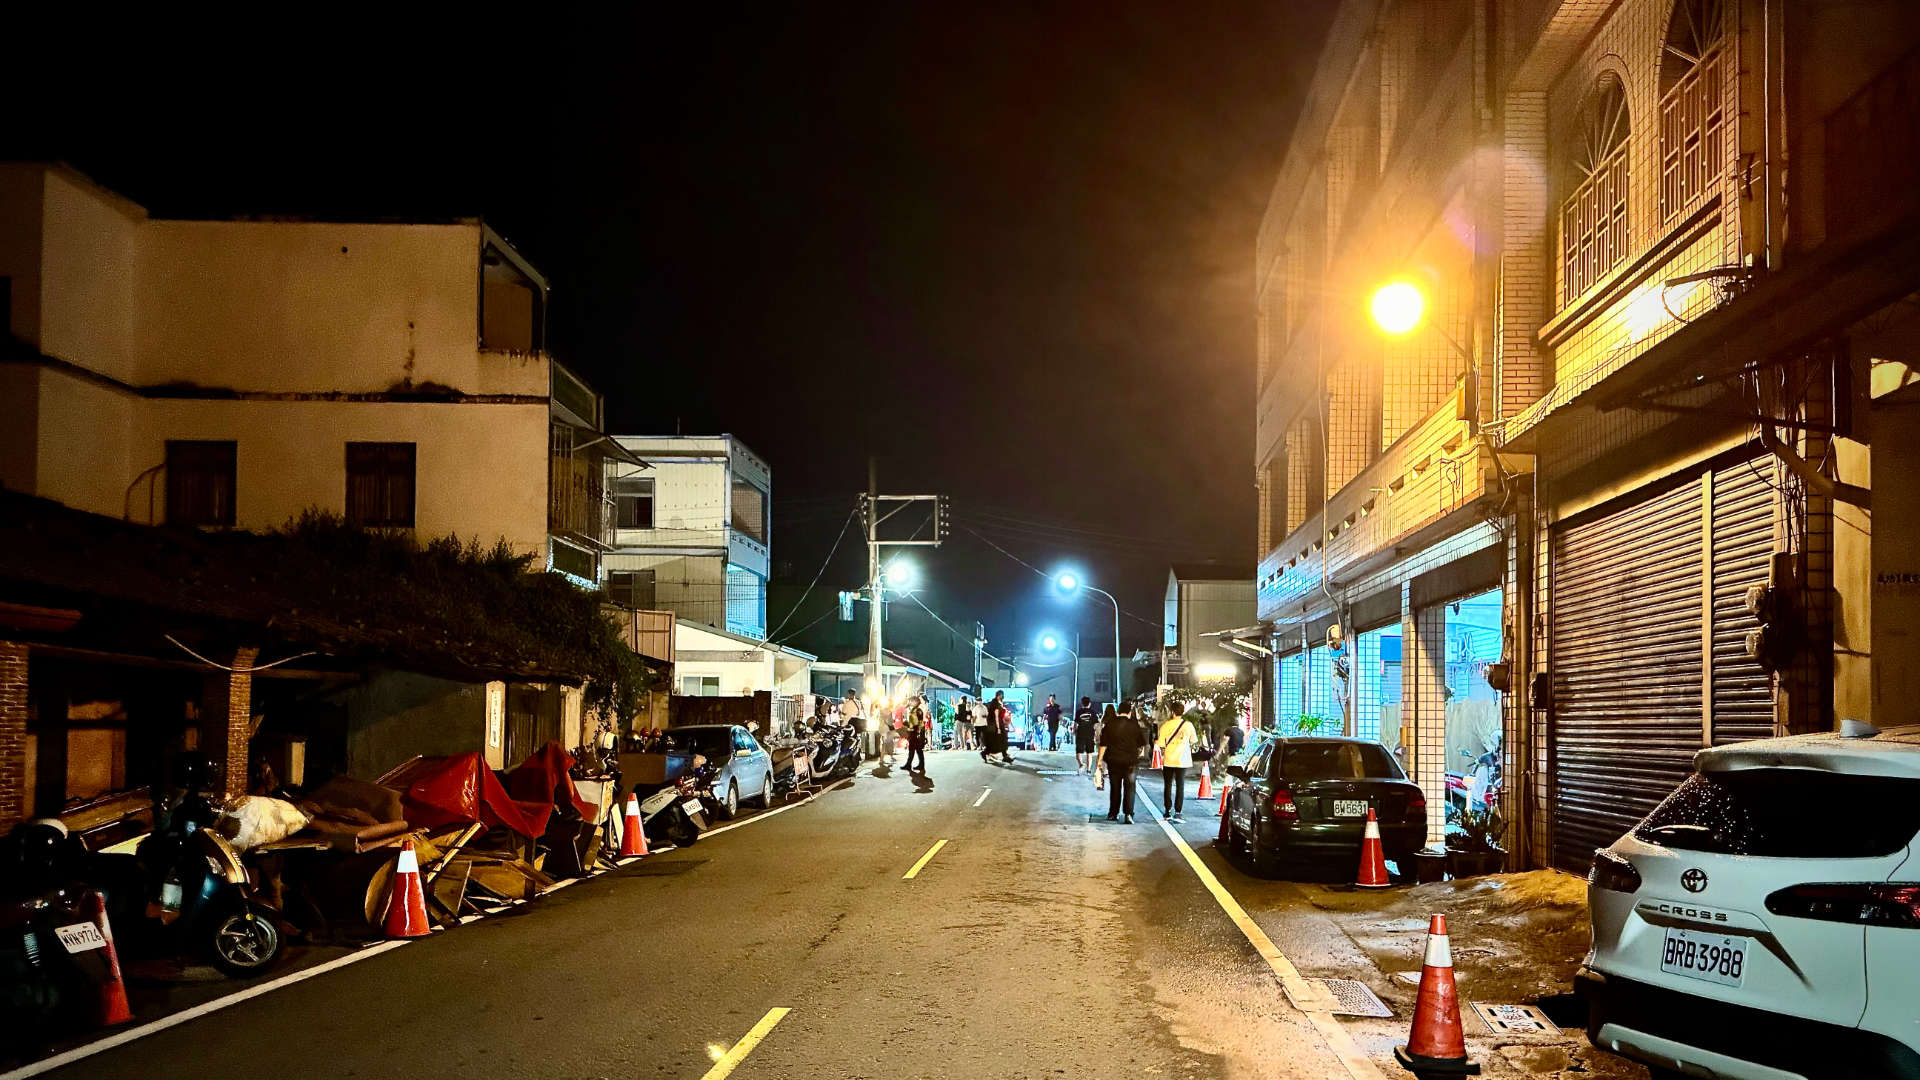 An empty street in Meikong, Taiwan, at night. There are crowds of people in the distance.